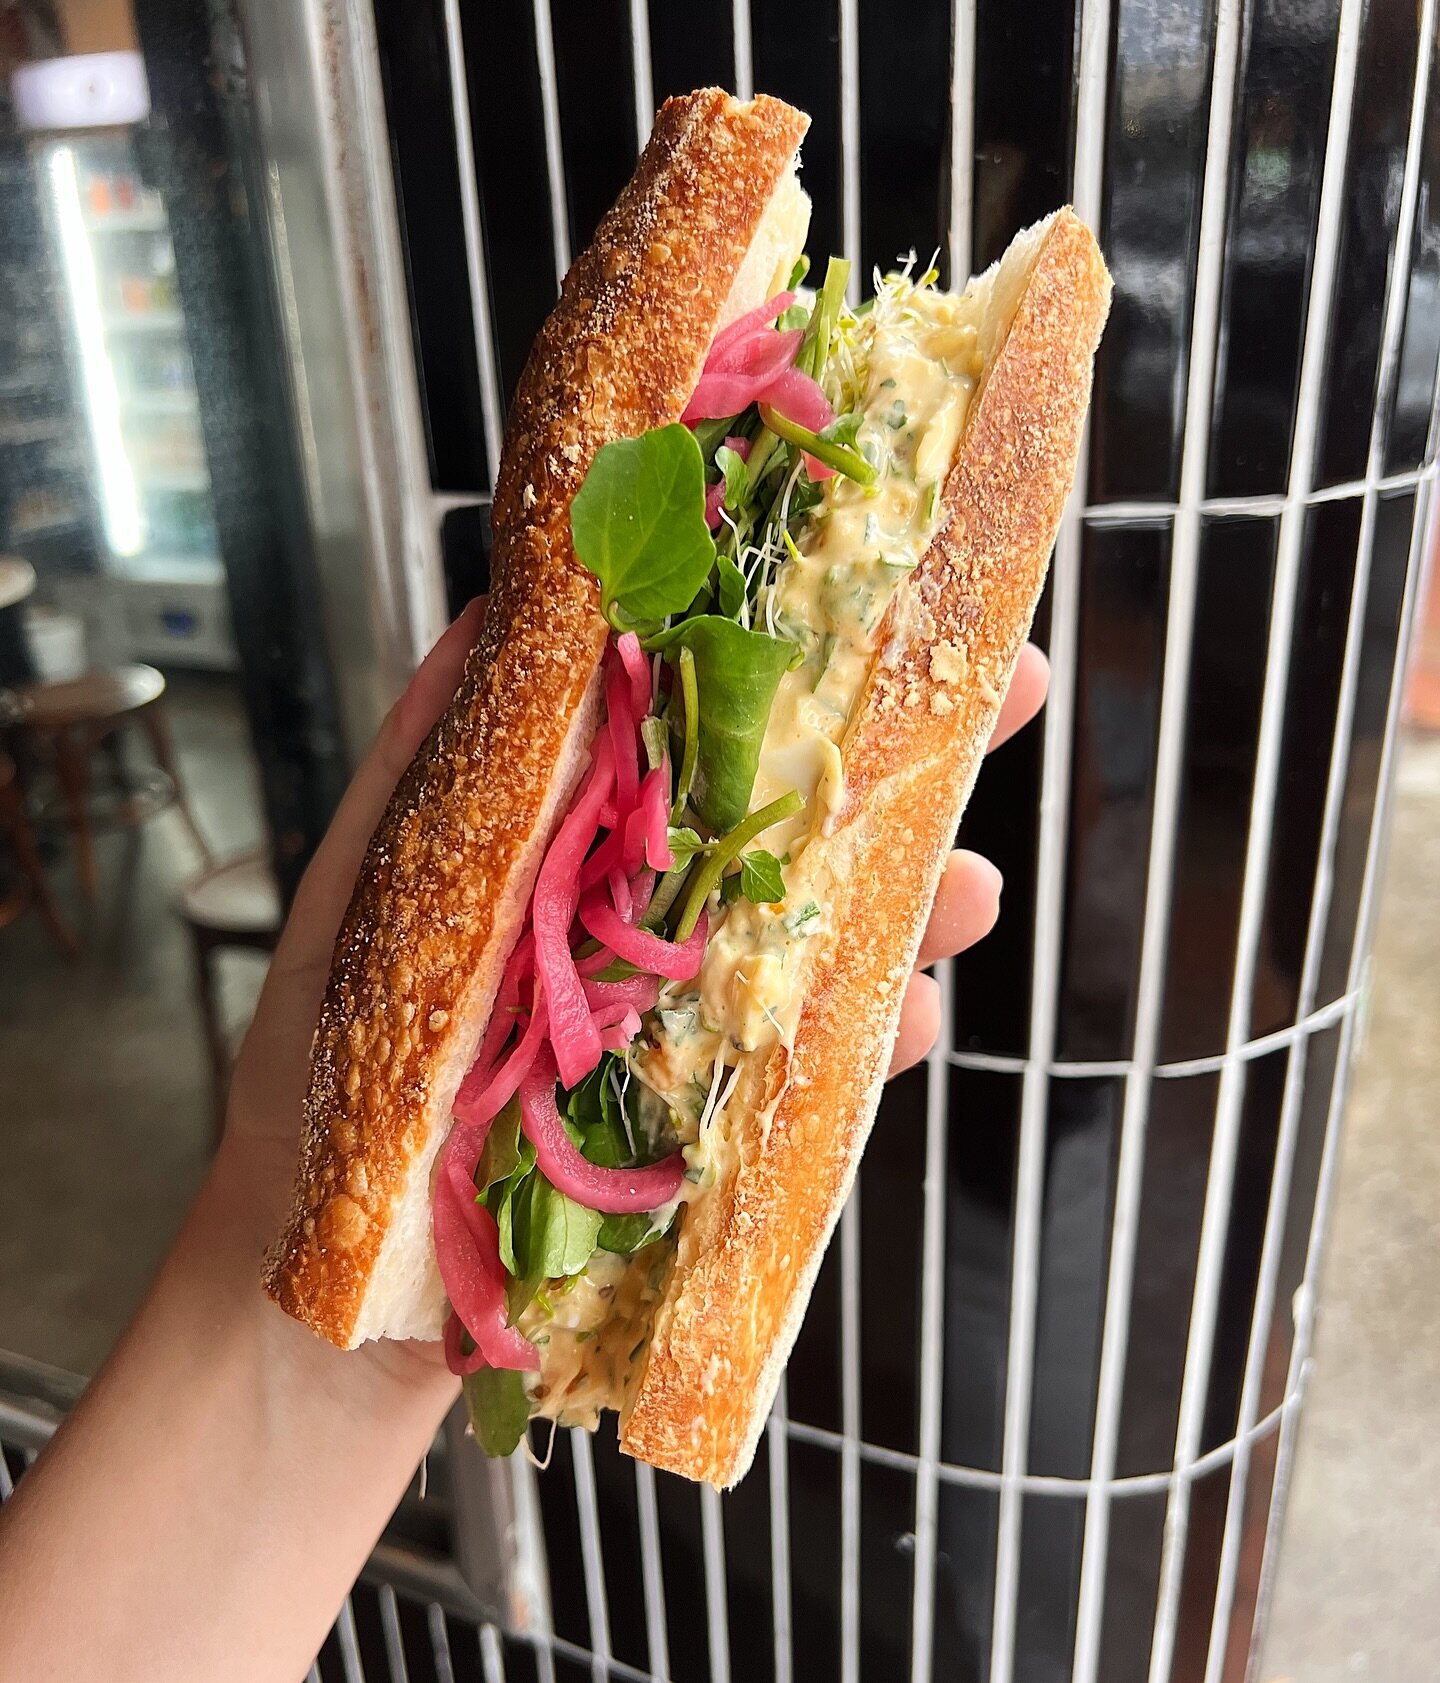 Easter might be over but the eggs are still aplenty. 🥚🐣Egg Salad Special on this weekend! 🥚🐣 egg mayo herb mix, sprouts, watercress, picked onion, grain bakery baguette 🙌🏻